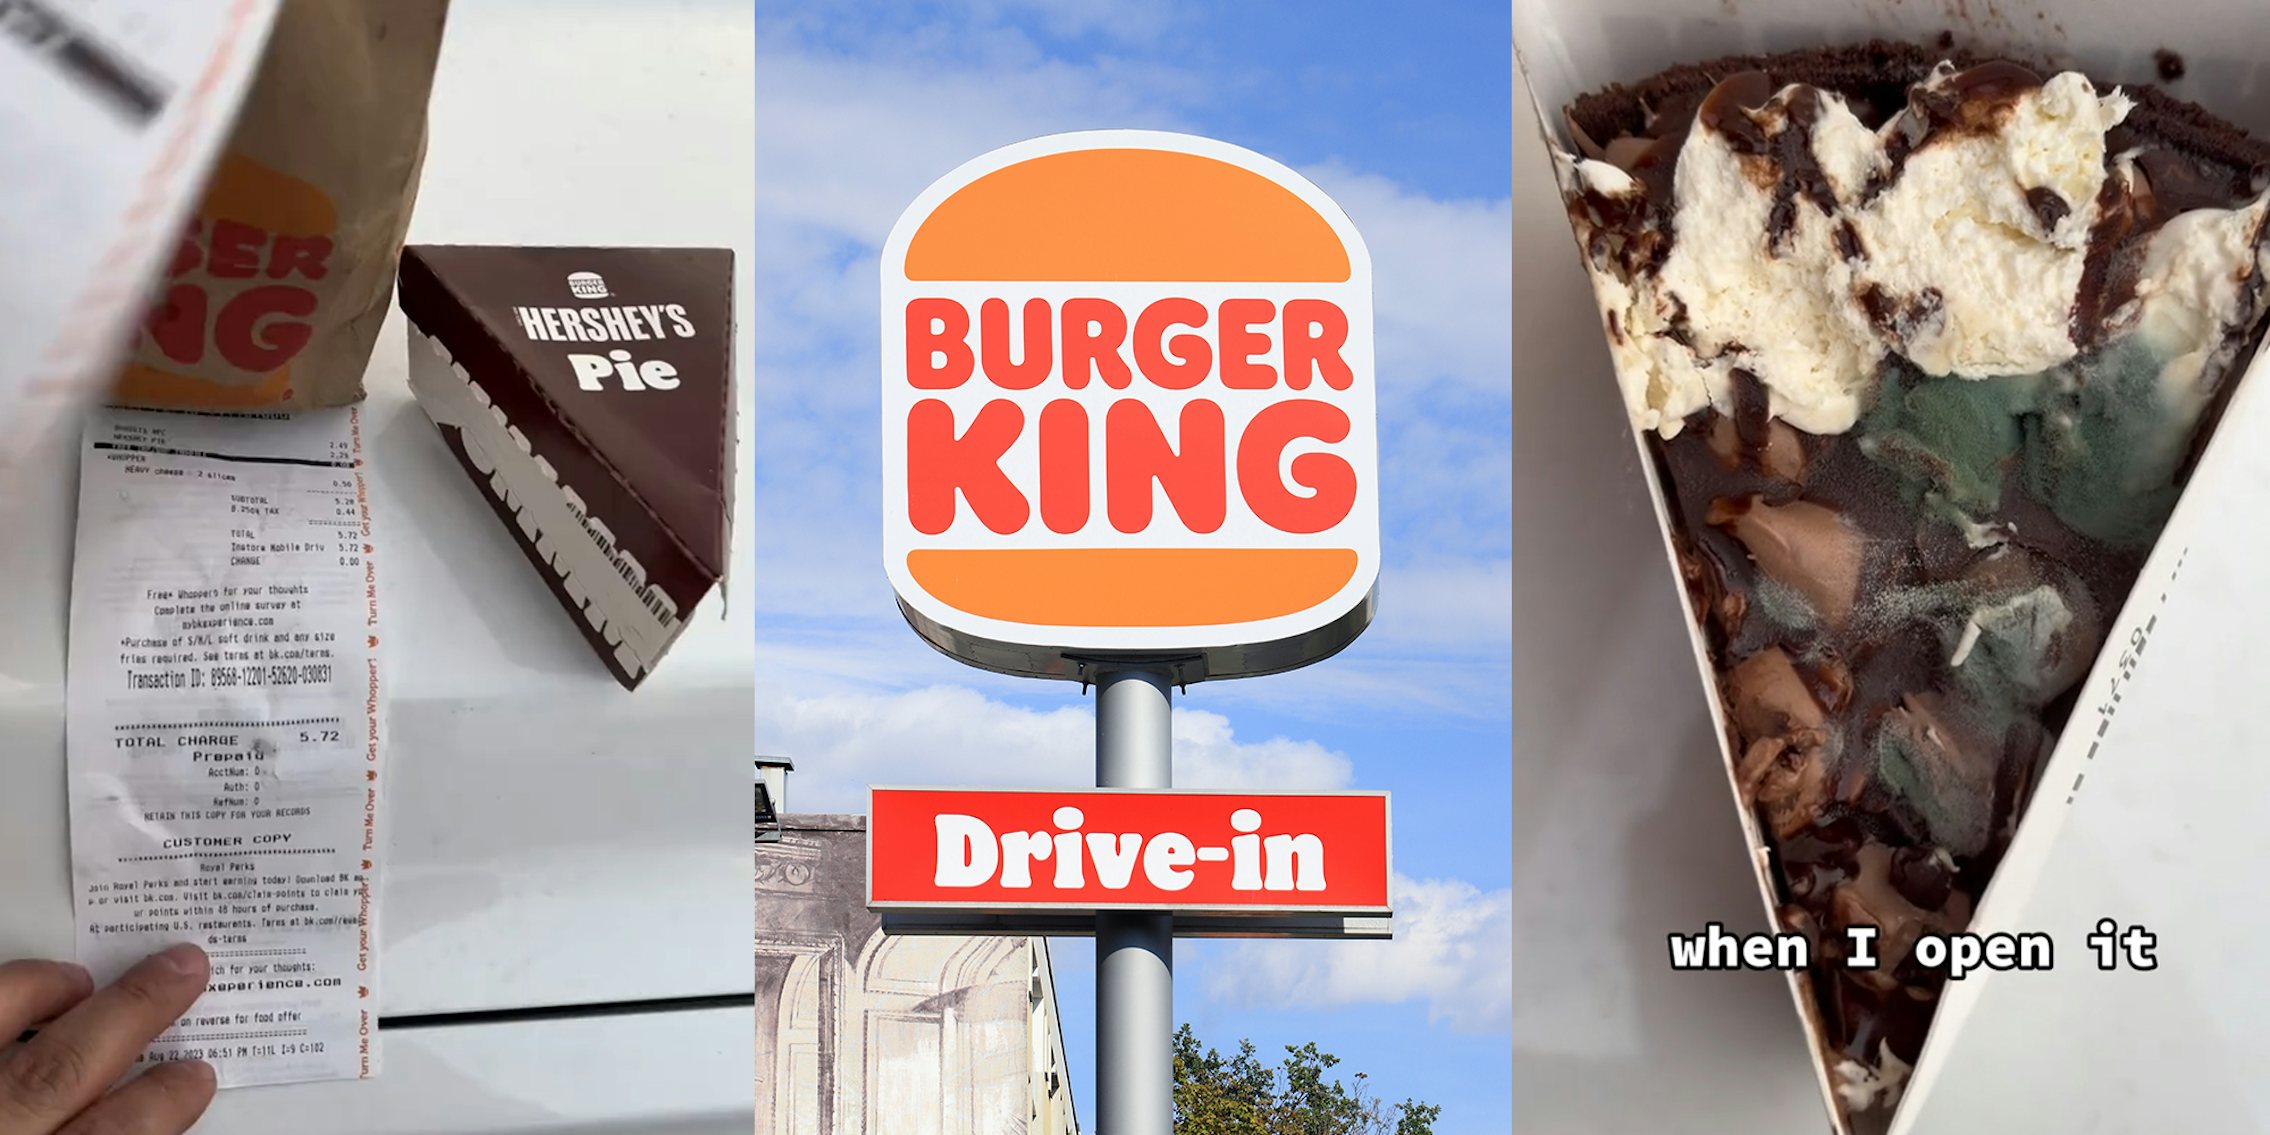 Customer mobile orders Burger King. His Hershey Pie is covered in mold